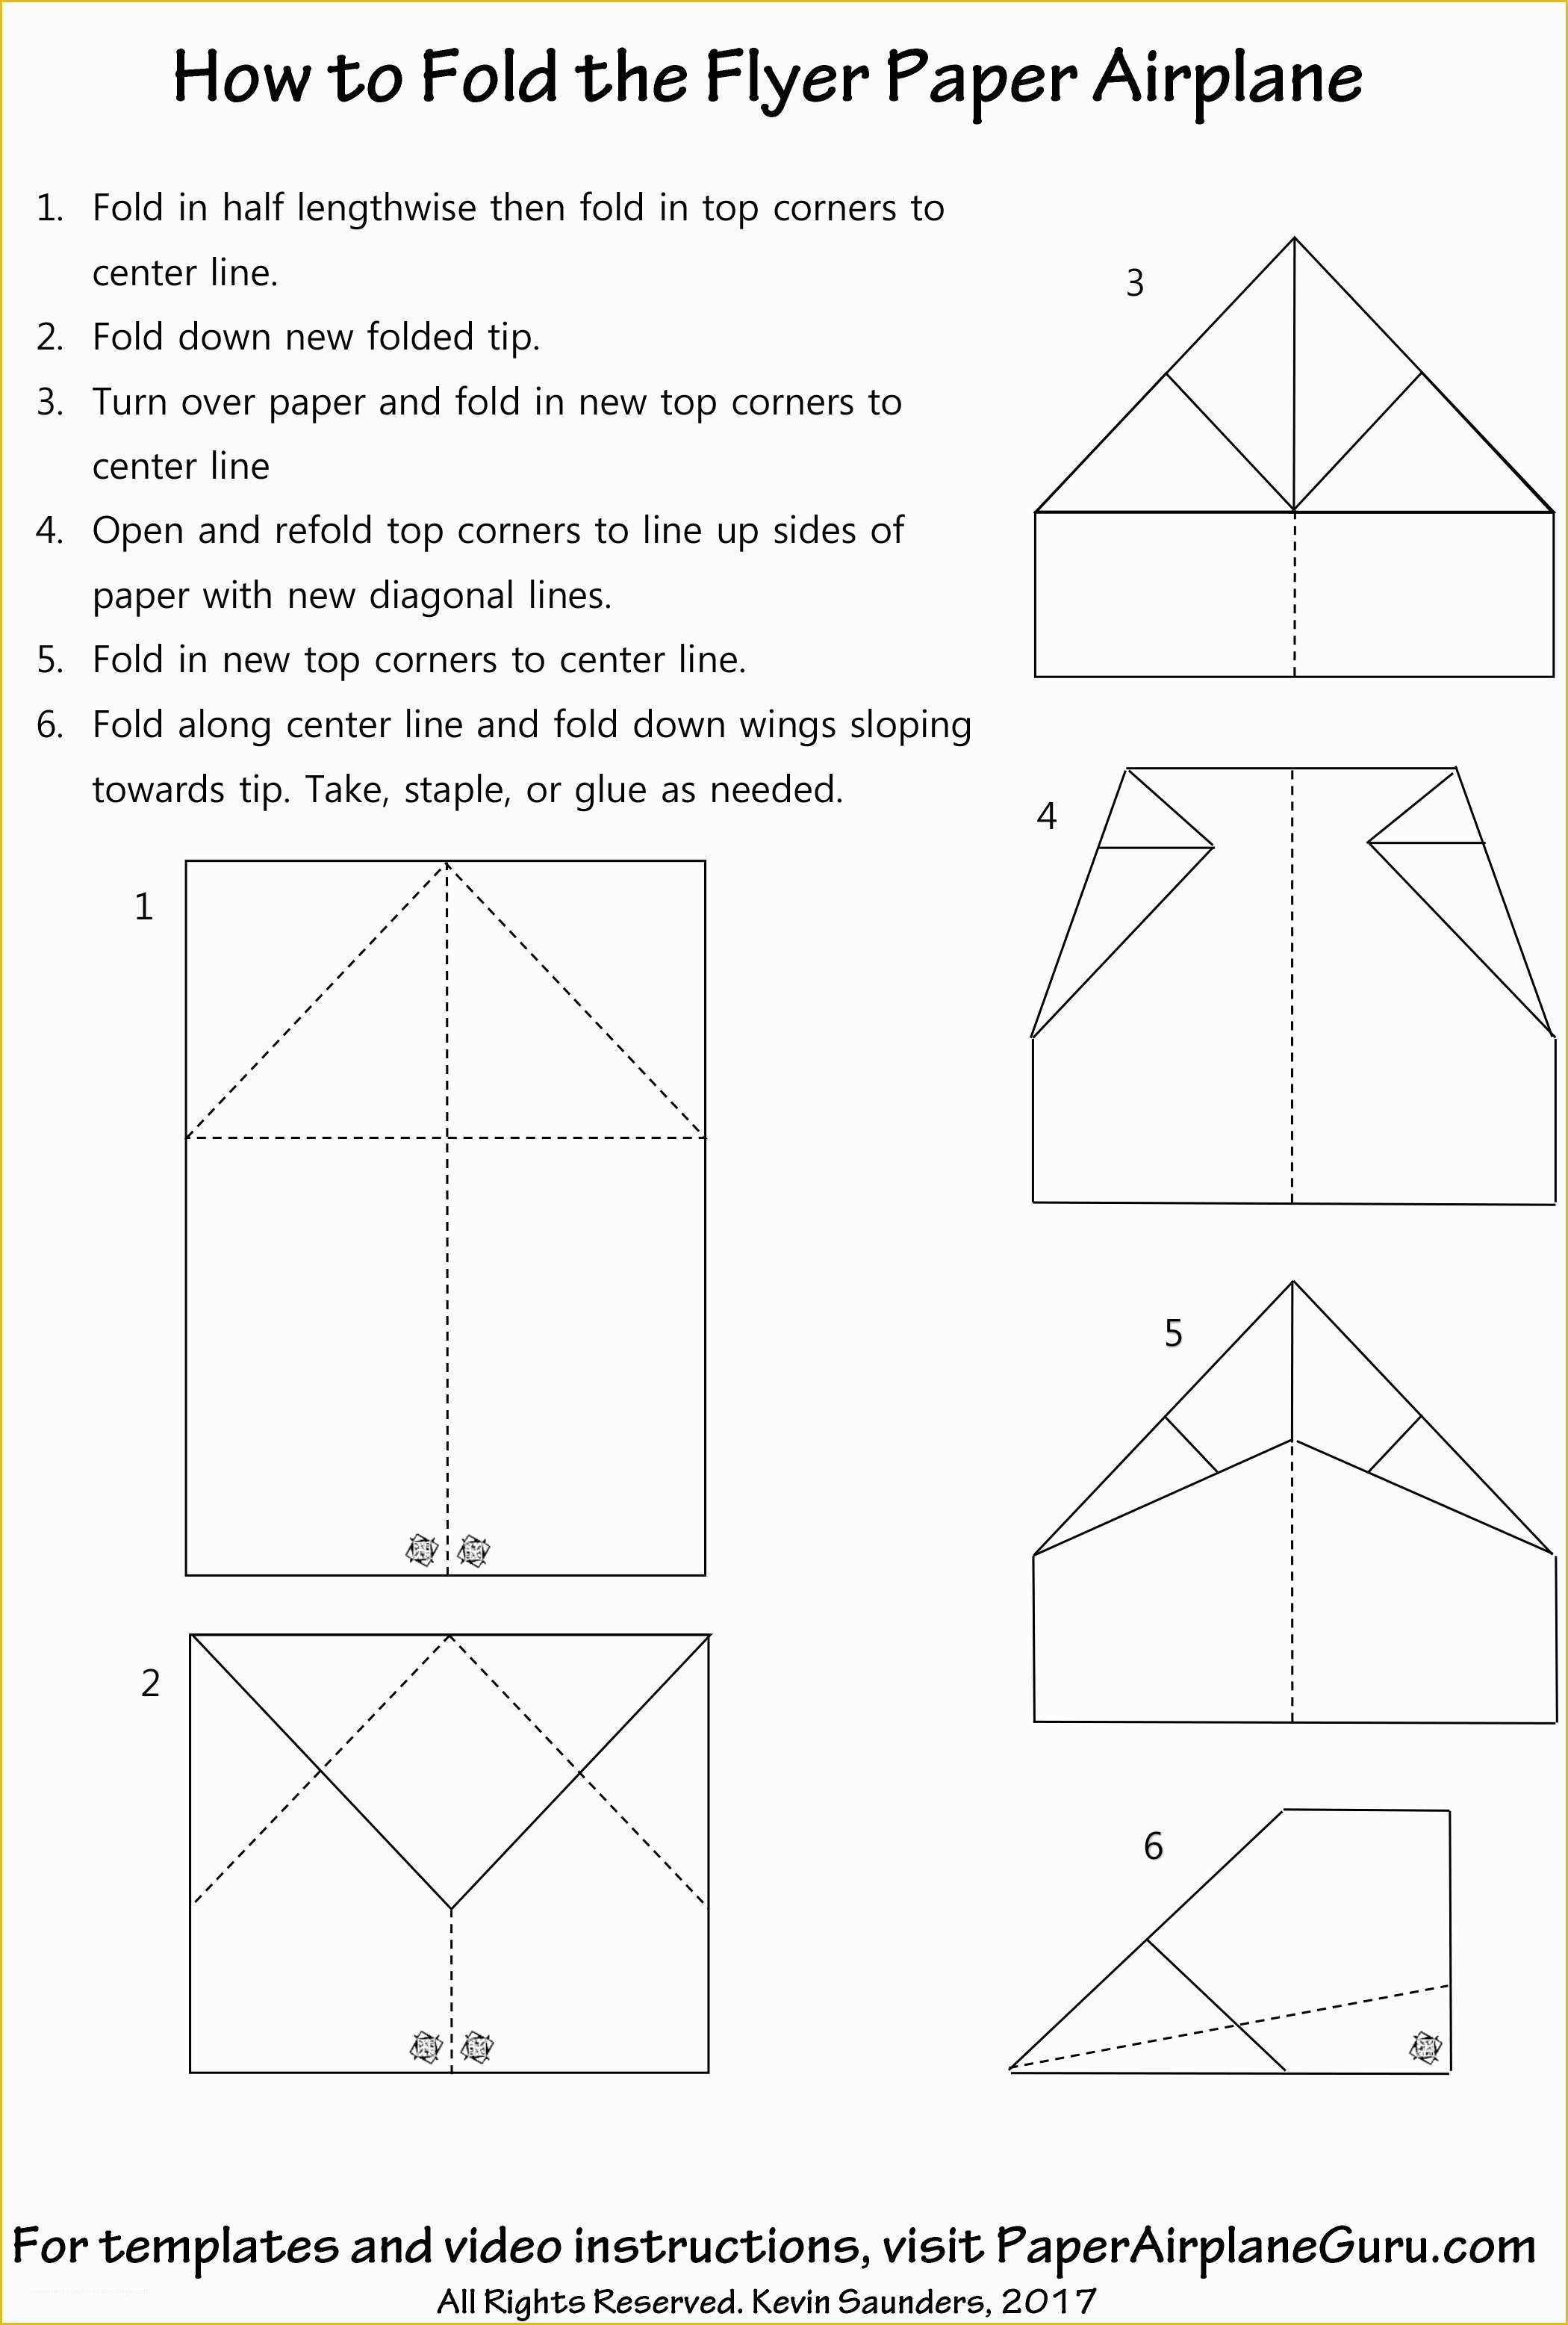 Free Paper Airplane Templates Of Flyer Paper Airplane Design Instructions and Templates